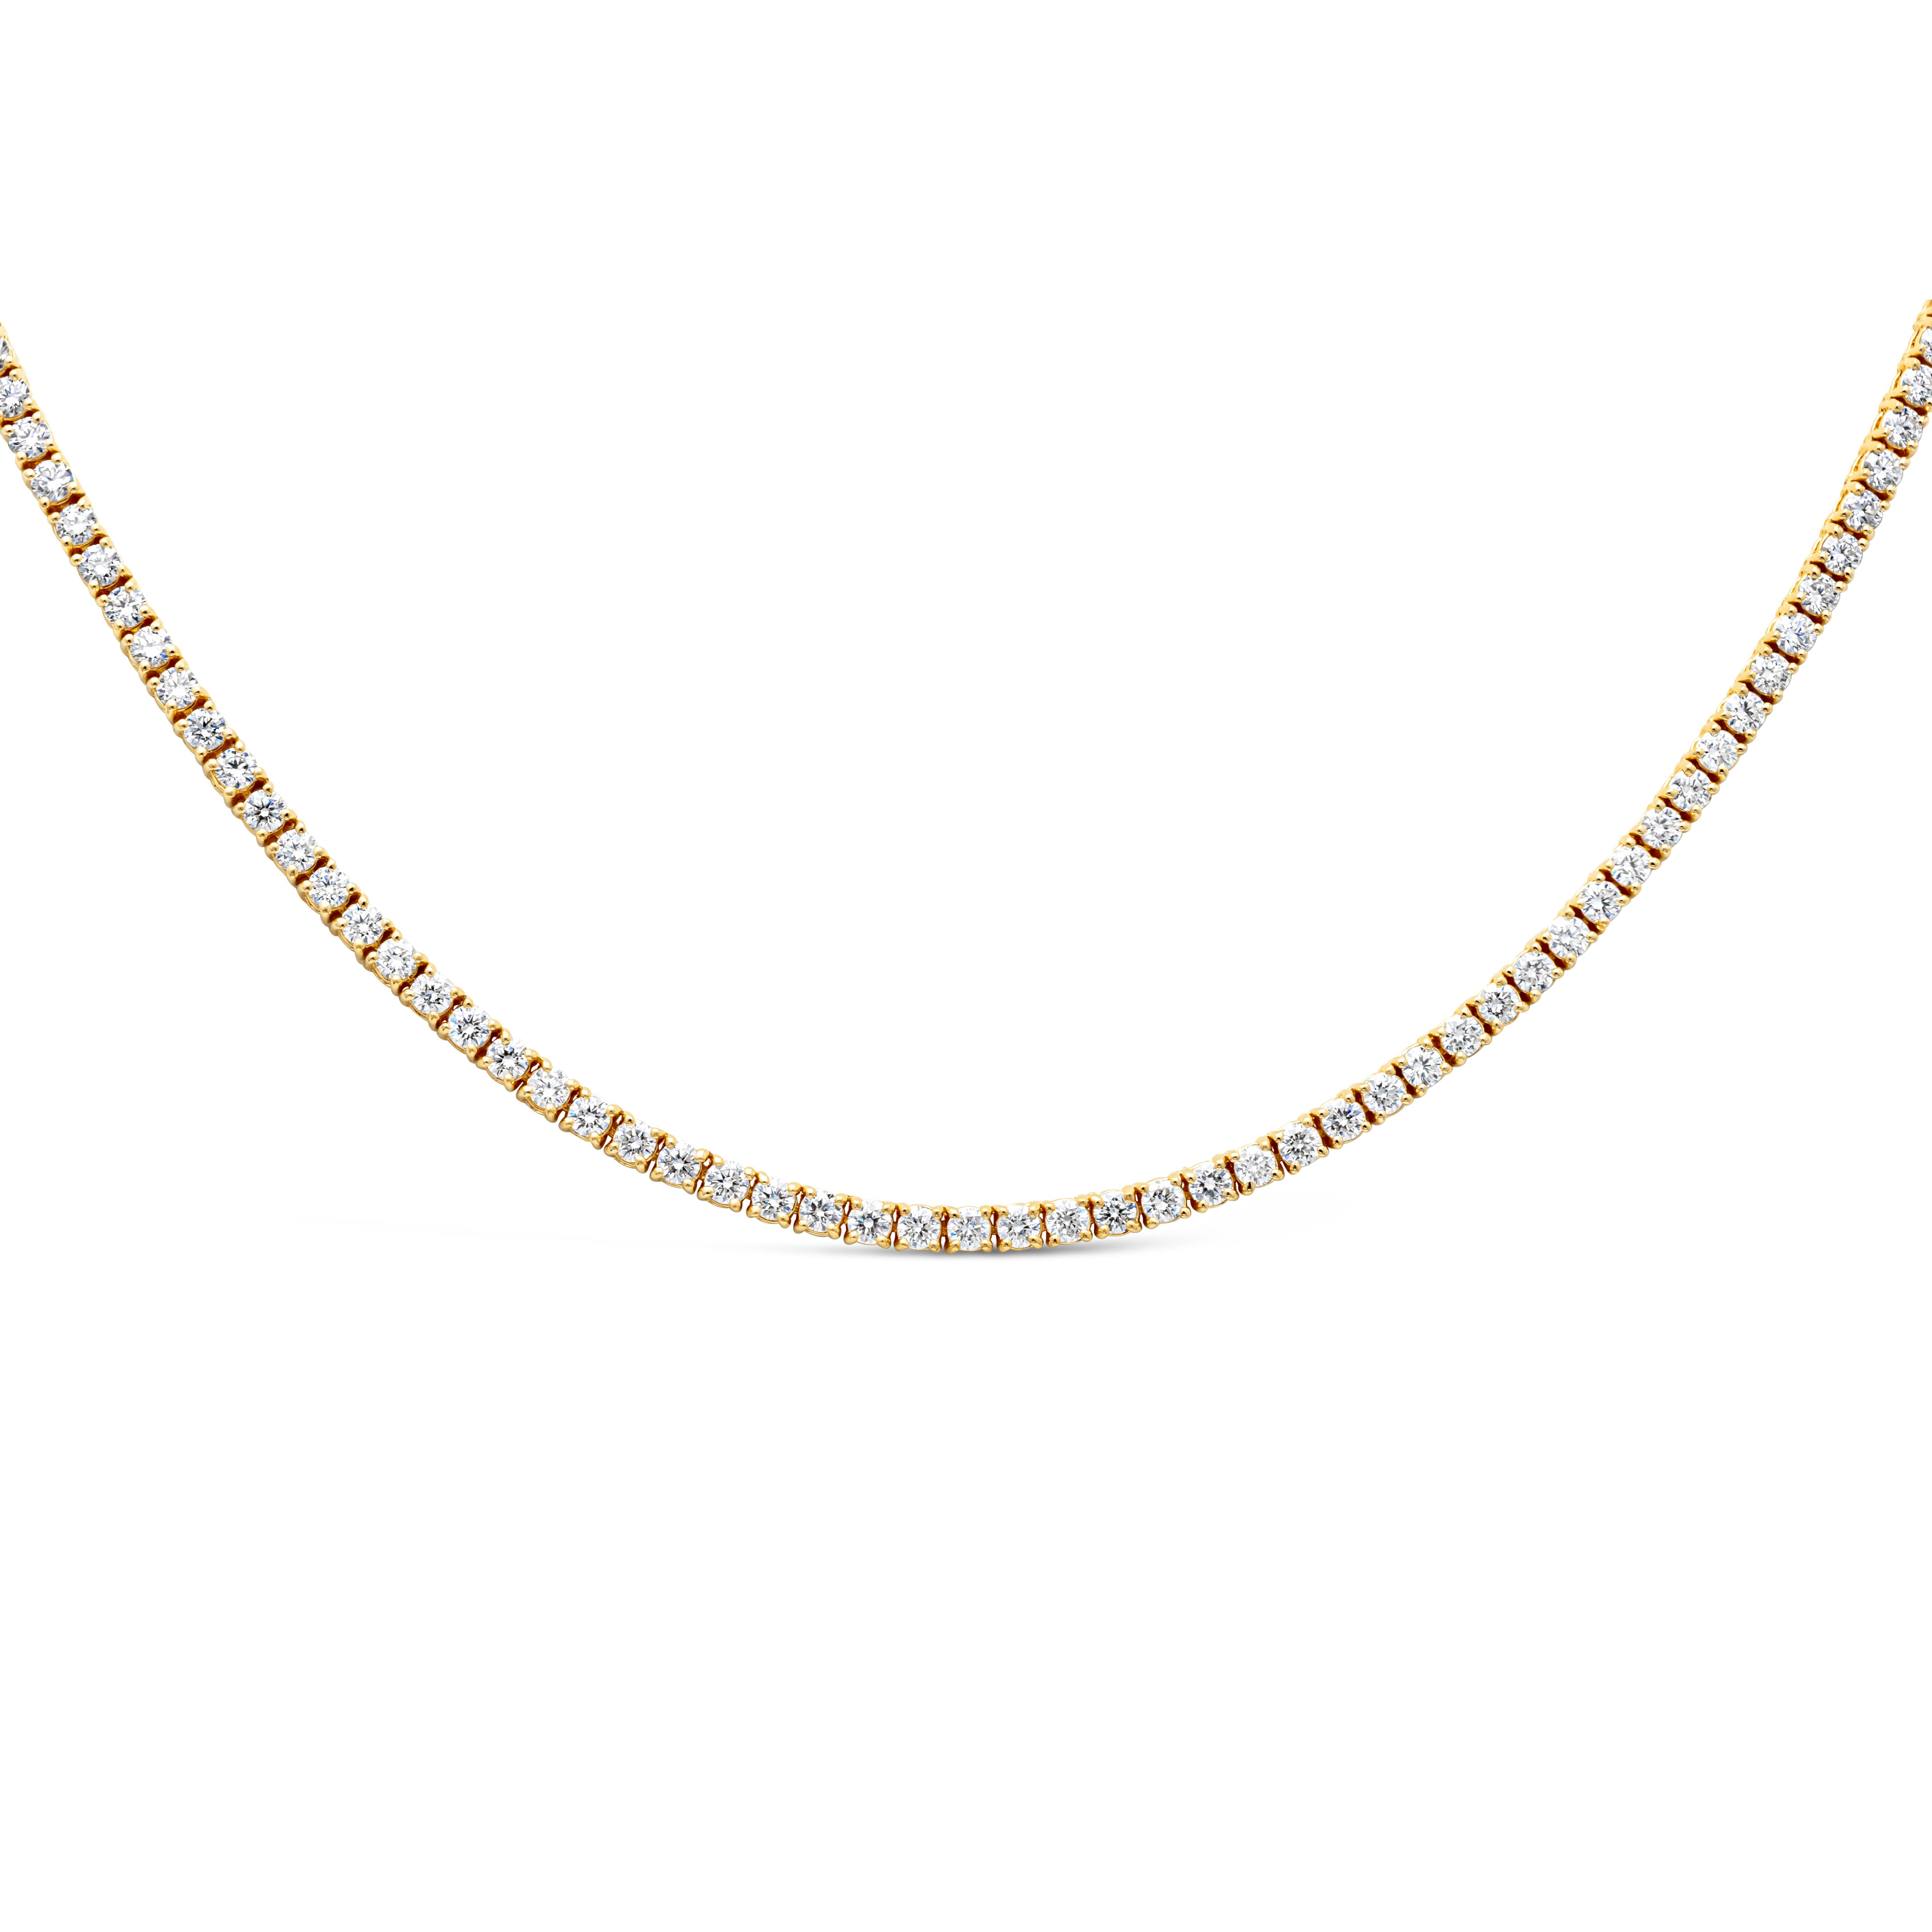 A classic and timeless tennis necklace showcasing a row of 168 brilliant round diamonds weighing 6.89 carats total, F color and SI in clarity. Set in four prong 14K Yellow Gold setting, 17 inches in Length. 

Roman Malakov is a custom house,